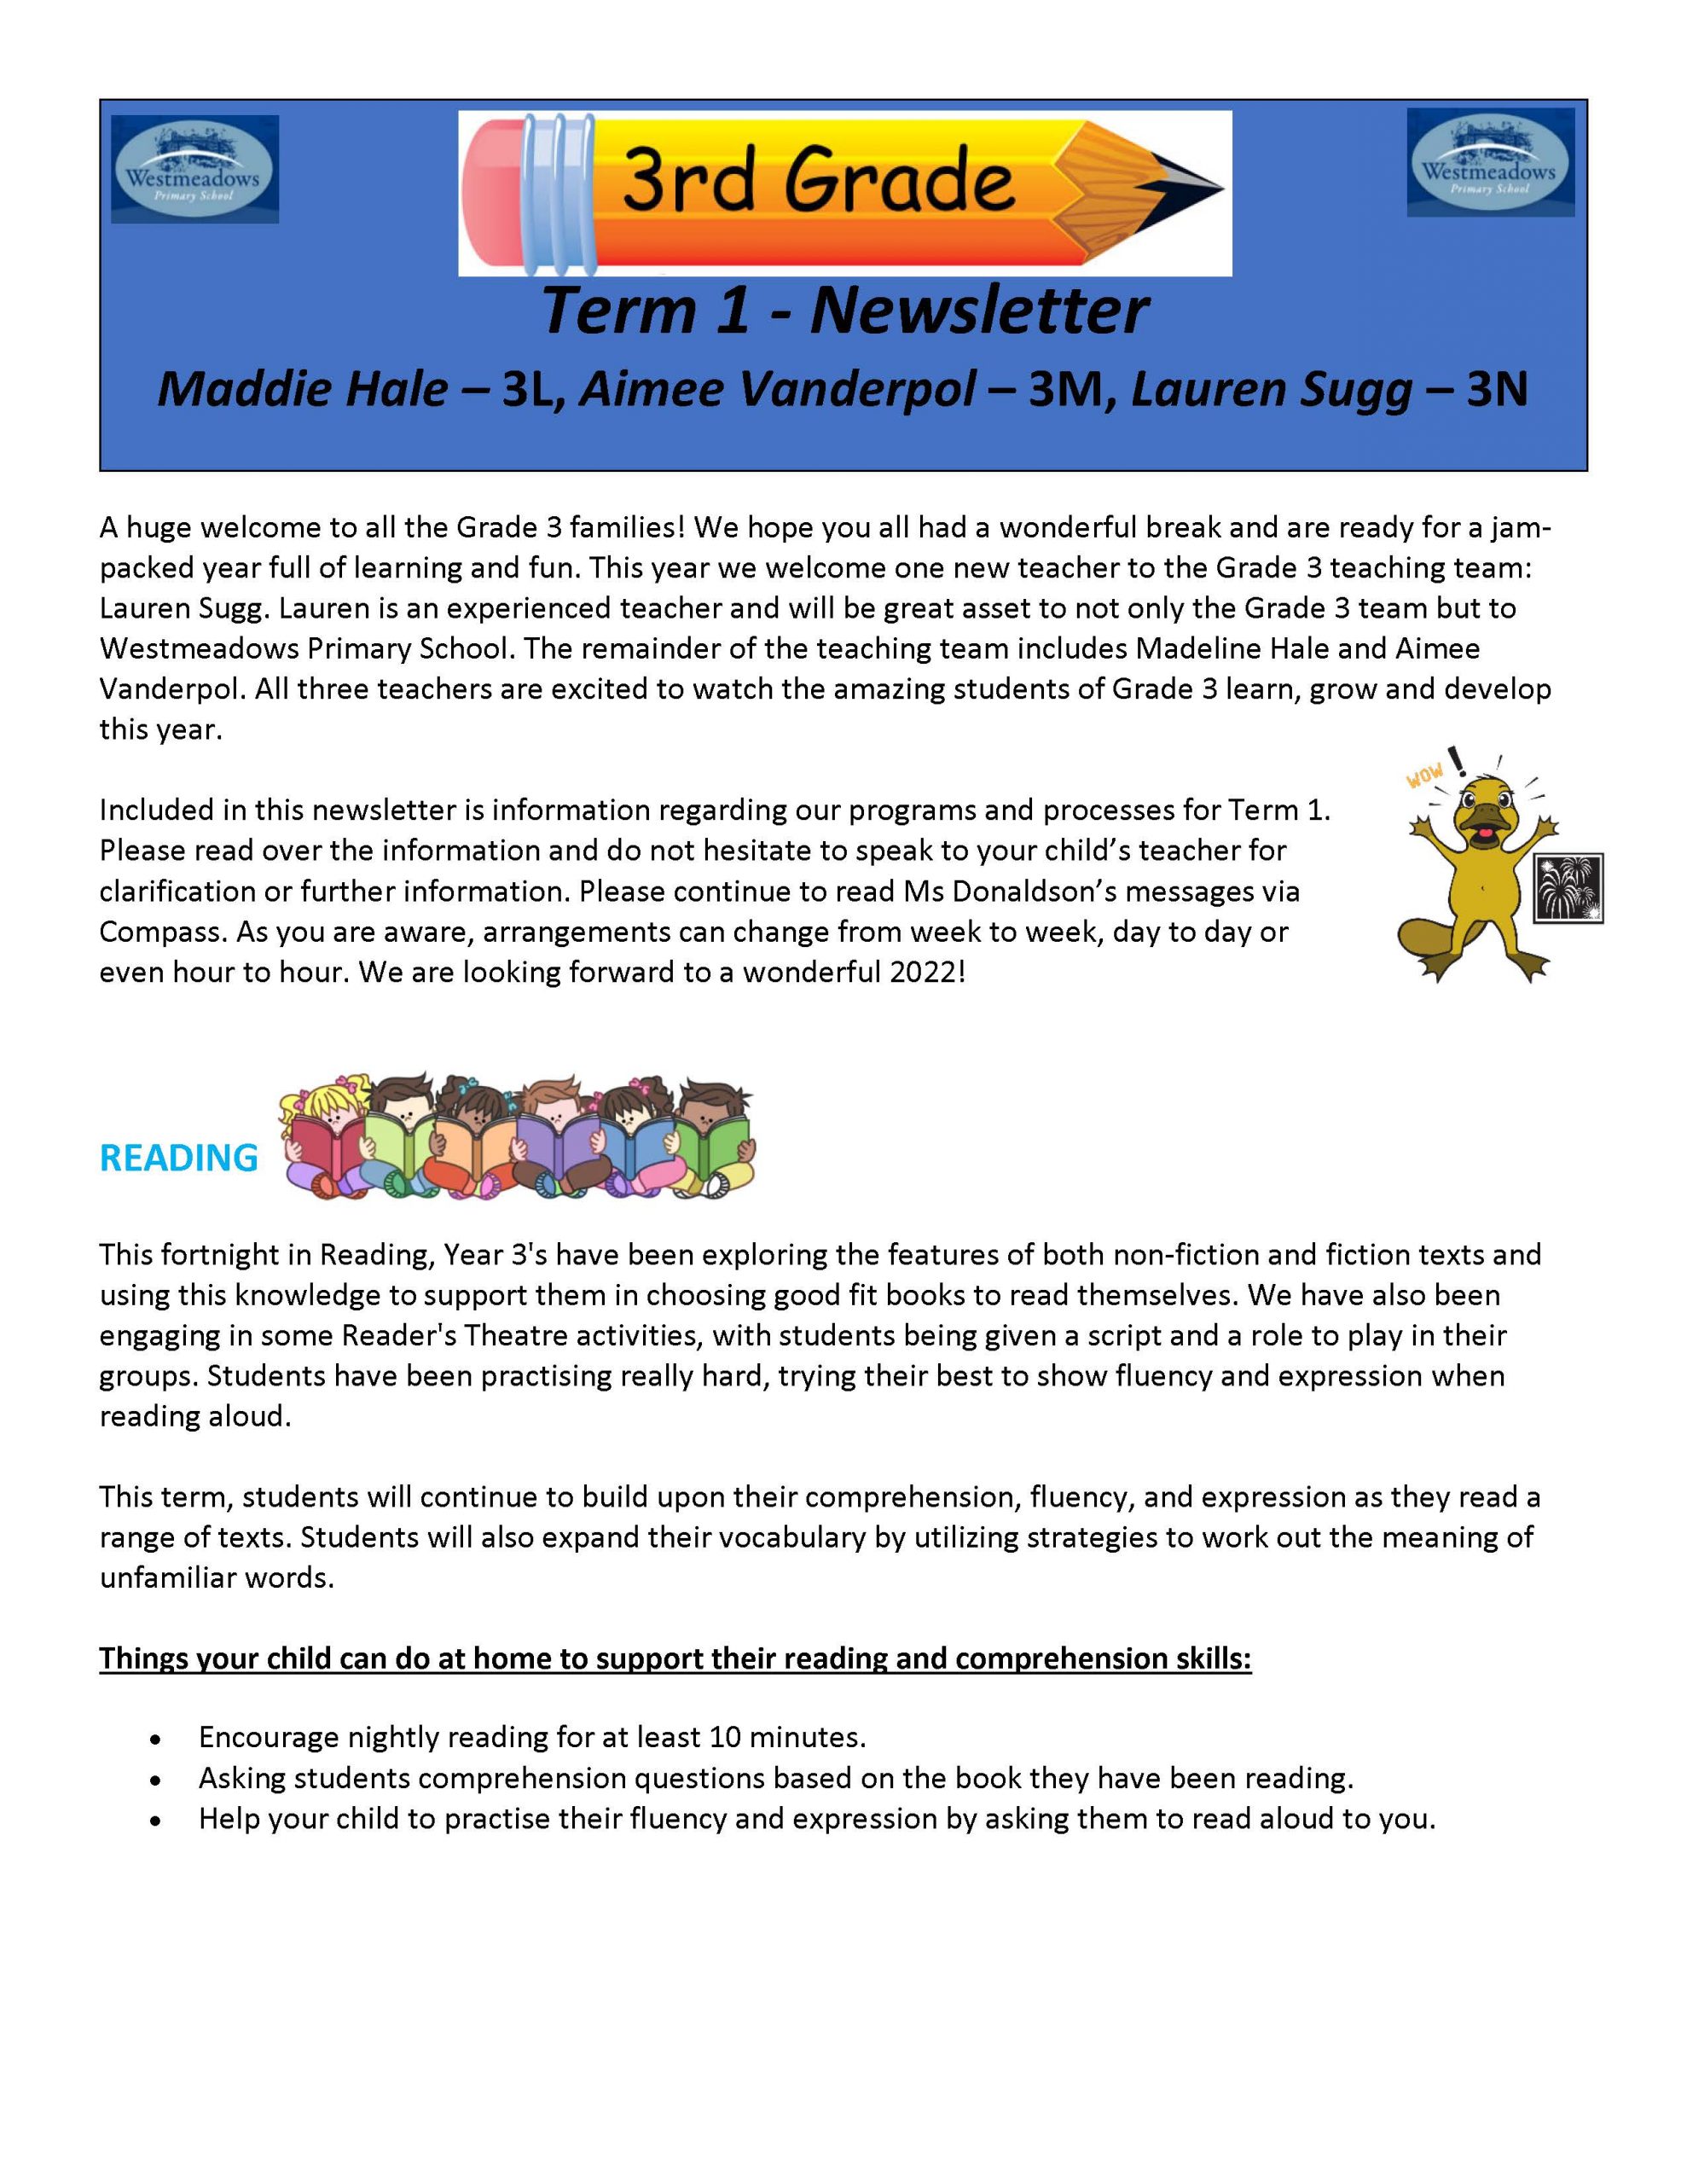 Grade 3 Term 1, 2022 Newsletter_Page_1